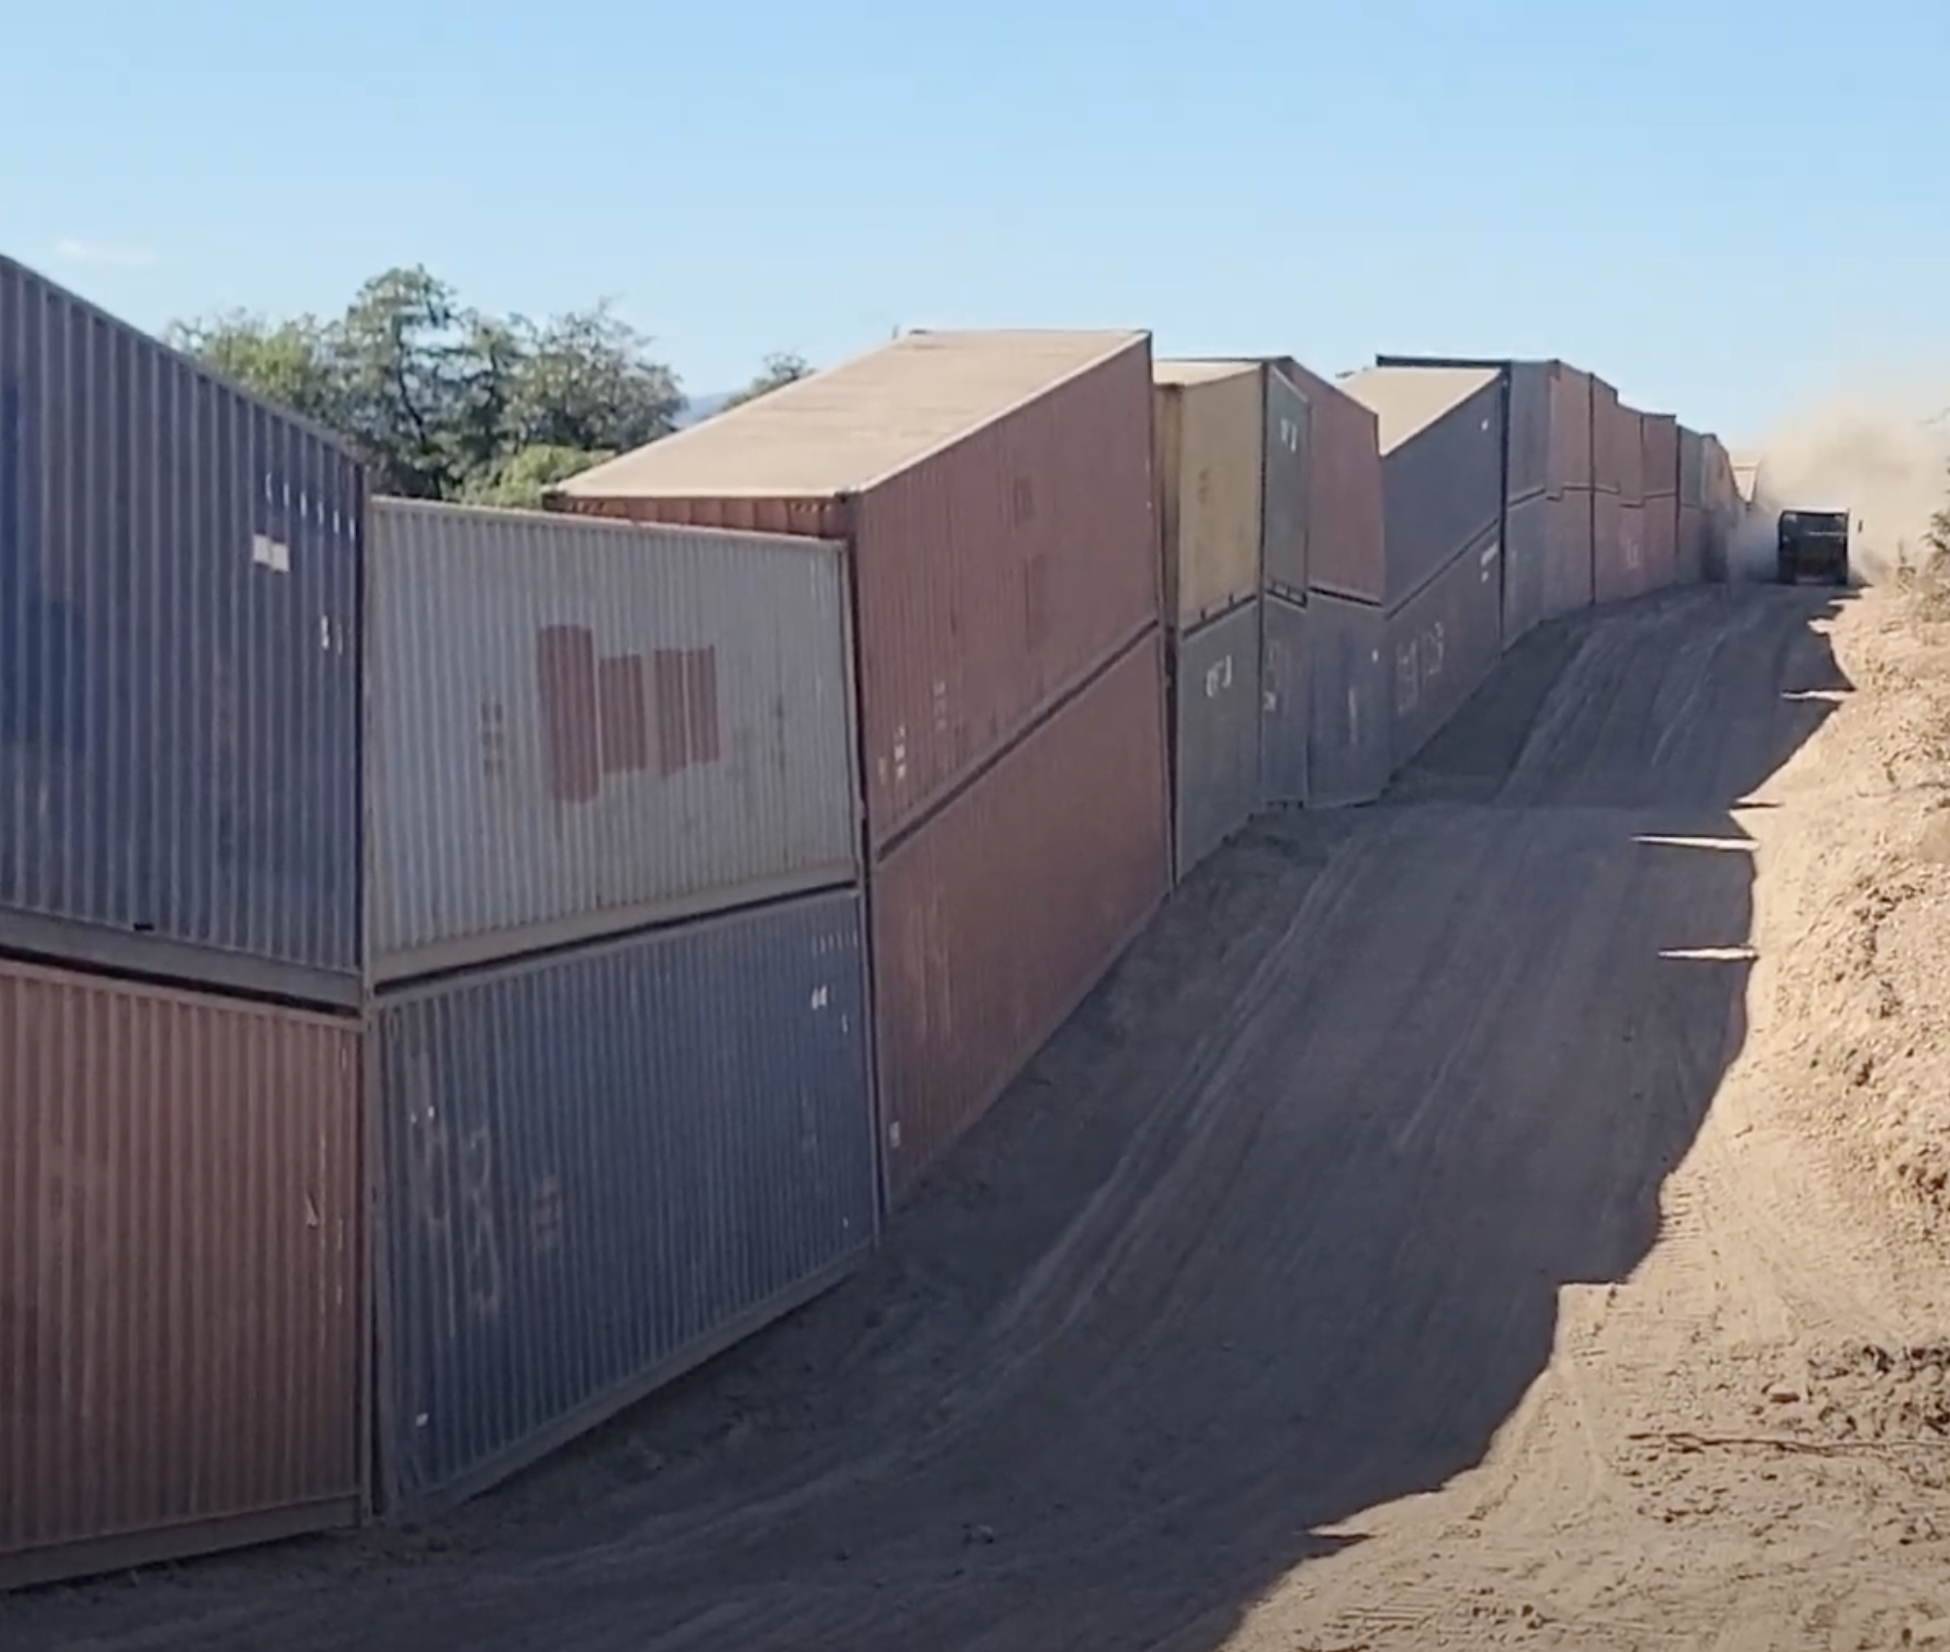 S2E3: Governor Ducey's Border Wall Comes Down